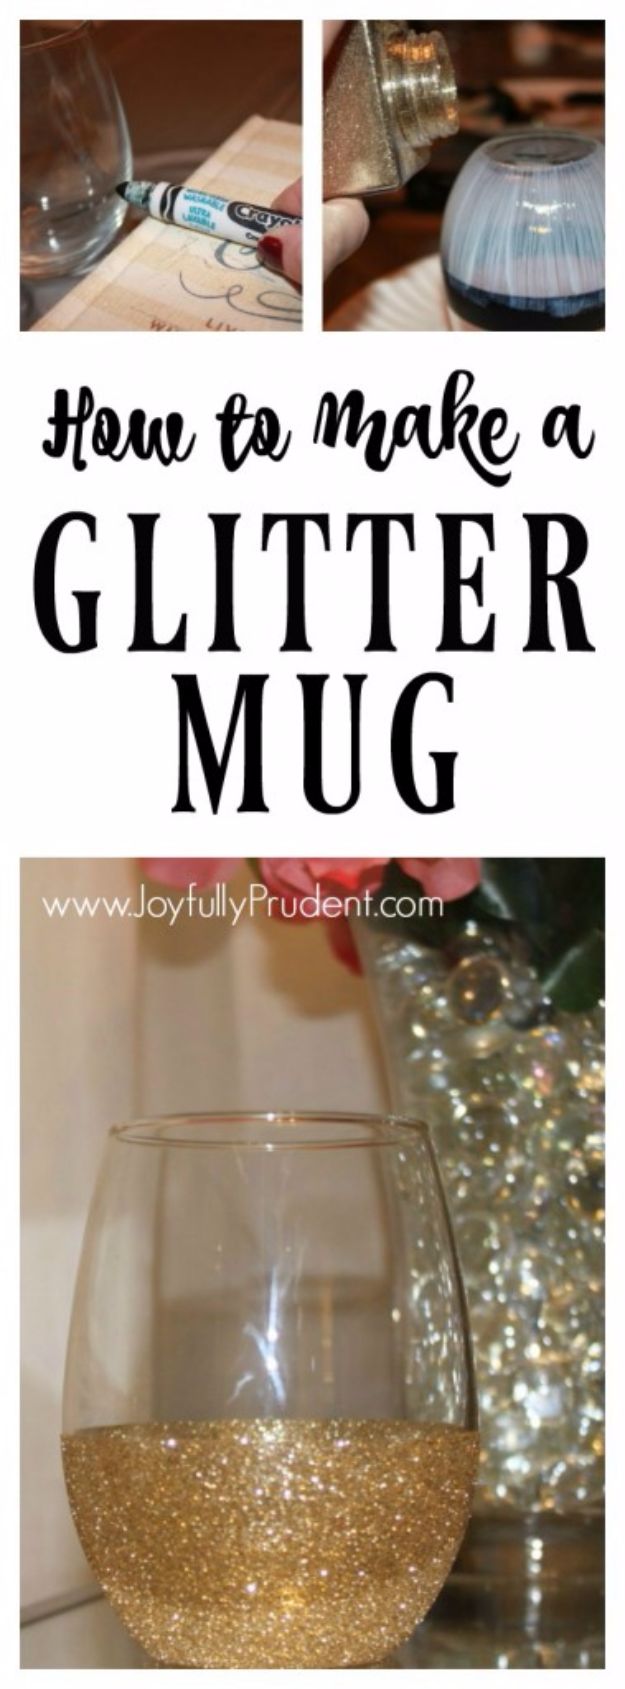 DIY Ideas WIth Glitter - Glitter Dipped Mug - Easy Crafts and Projects for Decoration, Gifts, and Bedroom Decor - How To Make Ombre, Mod Podge and Glitter Mason Jar Gift Ideas For Teens - Easy Clothes and Makeup Crafts For Teenagers #diyideas #glitter #crafts